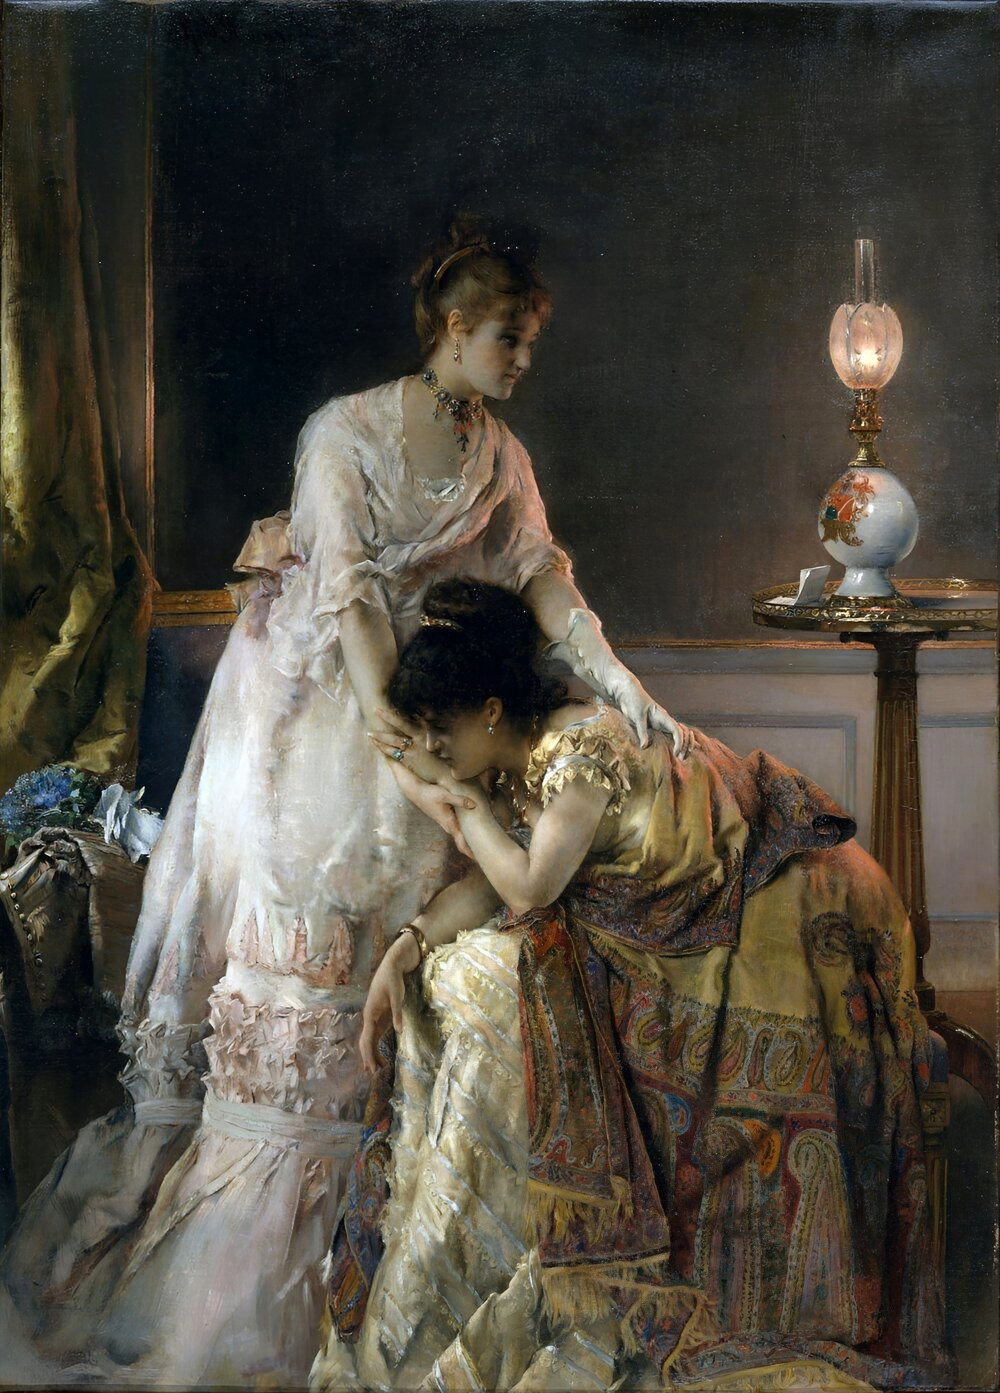 After the Ball by Alfred Stevens, 1873